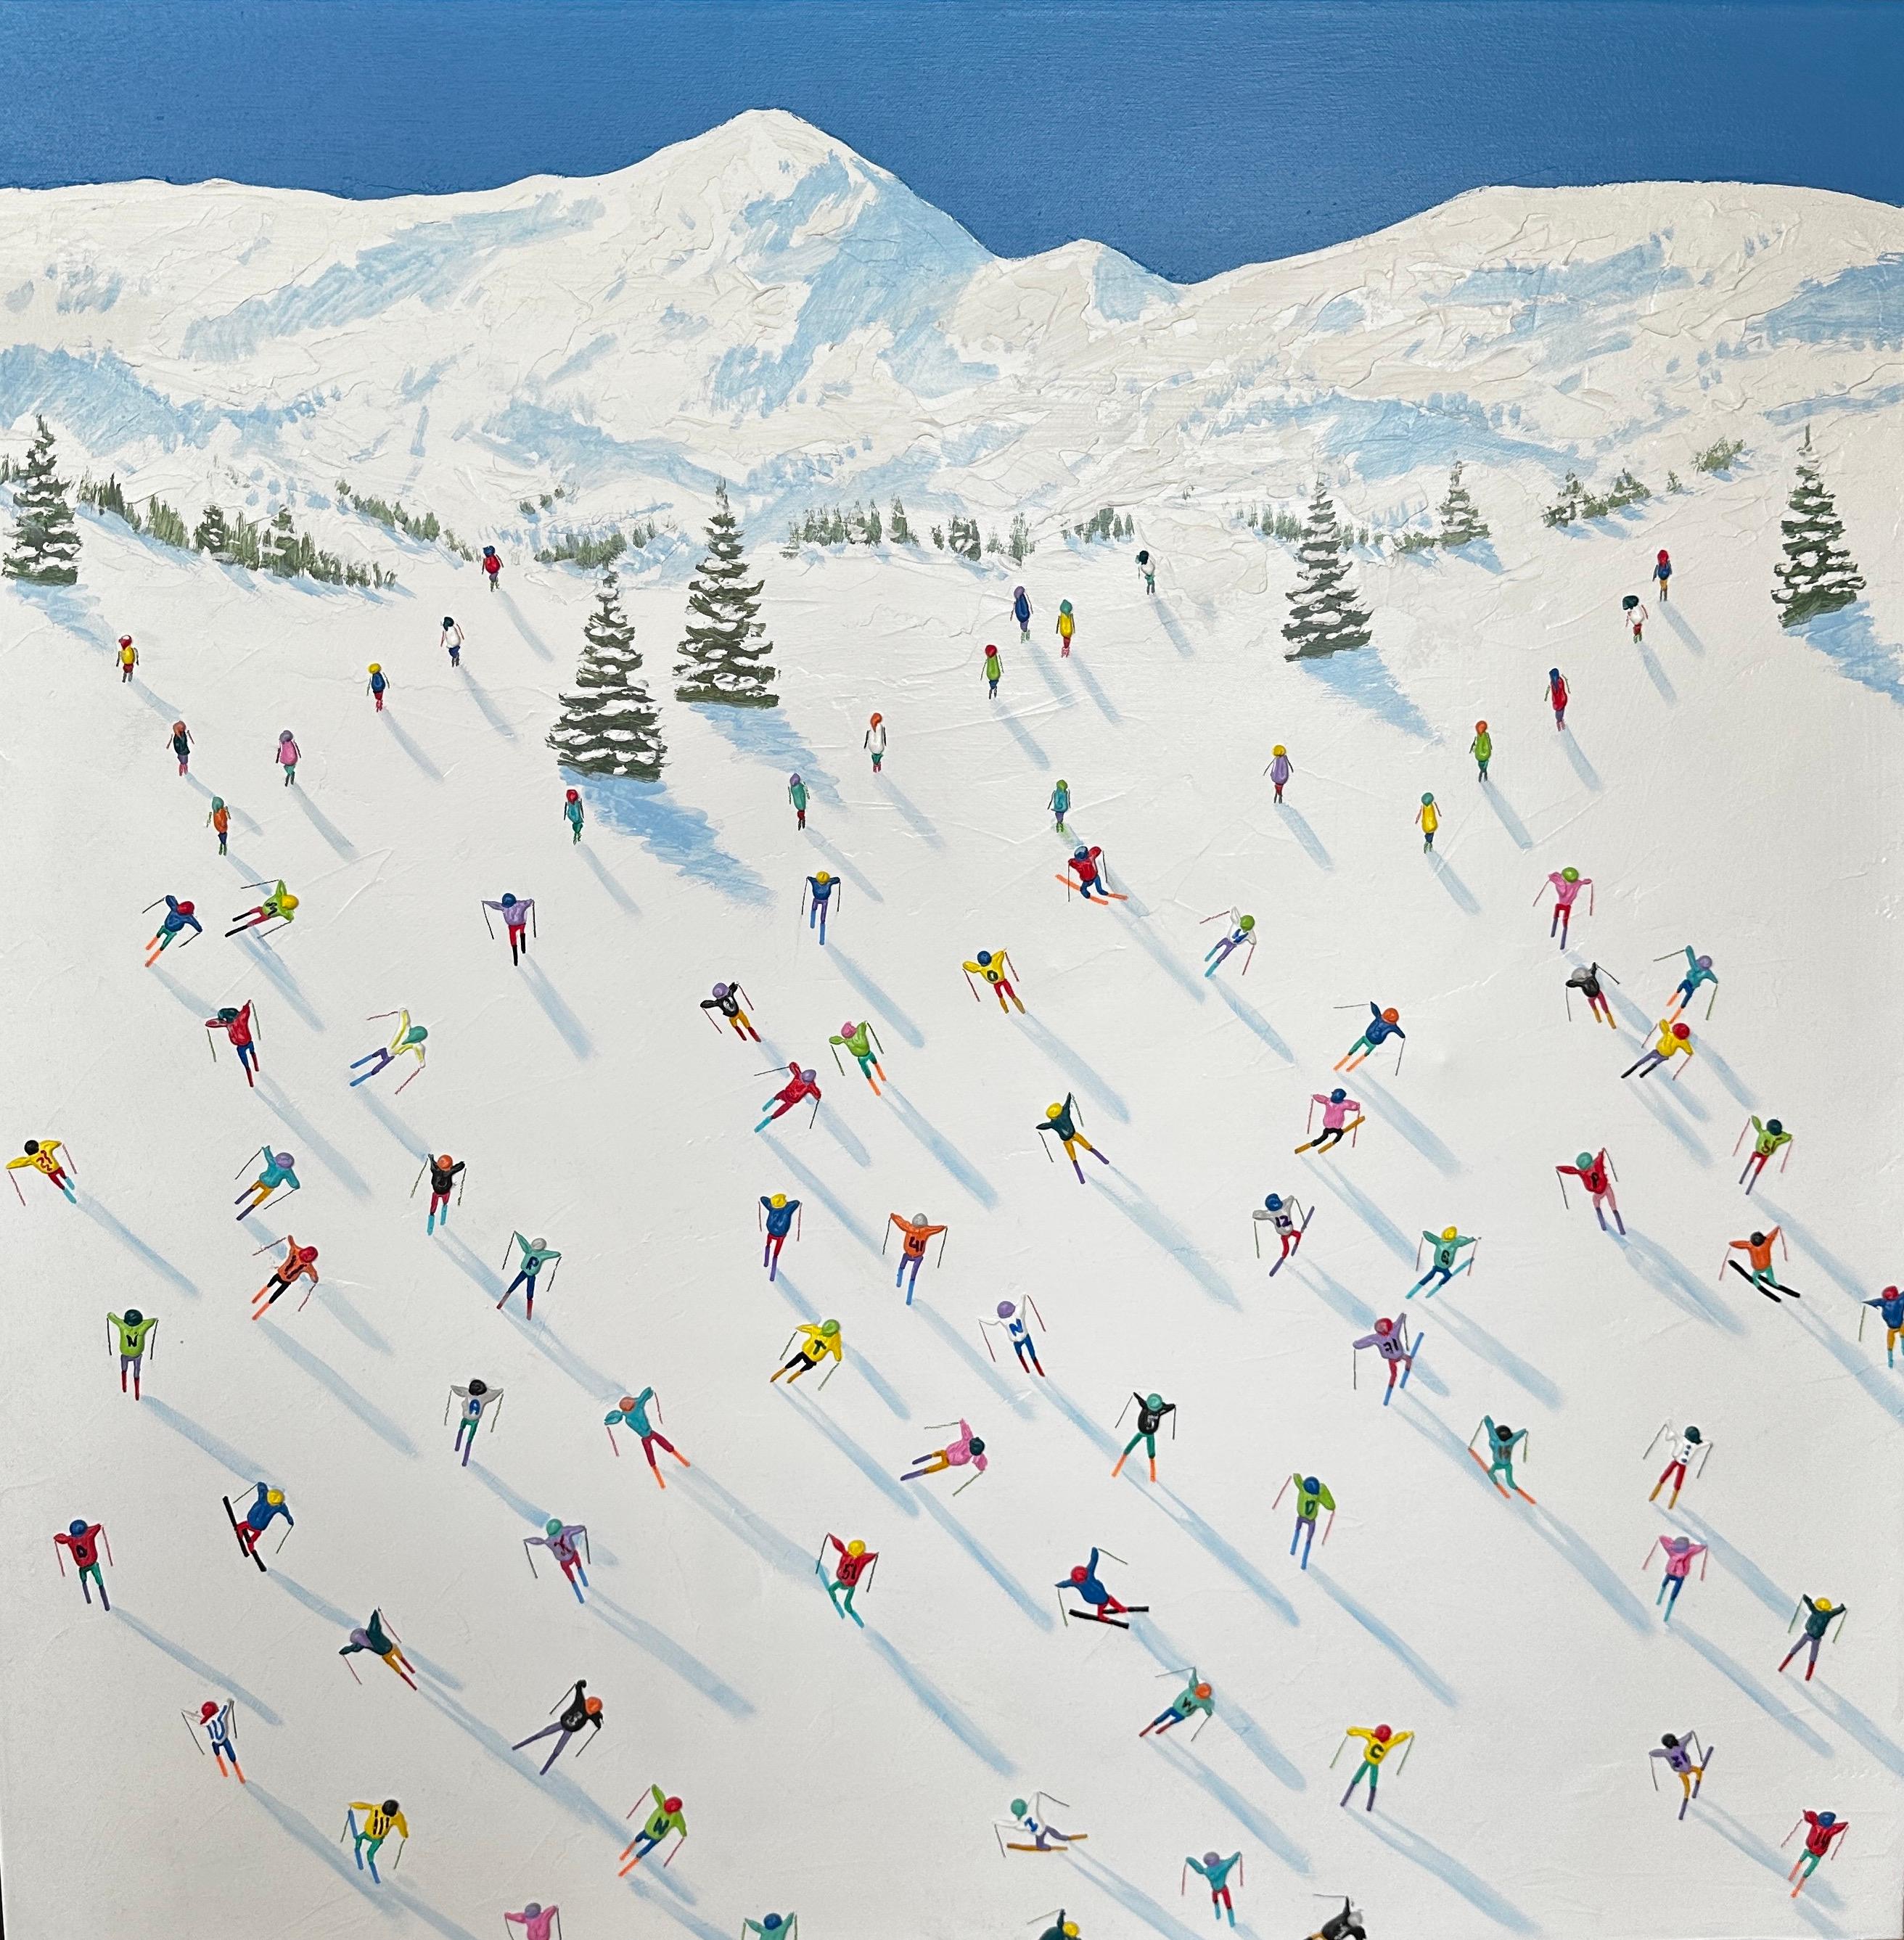 Max Todd Landscape Painting - 'Down the Slopes' Contemporary landscape painting of figures on skiis, mountains